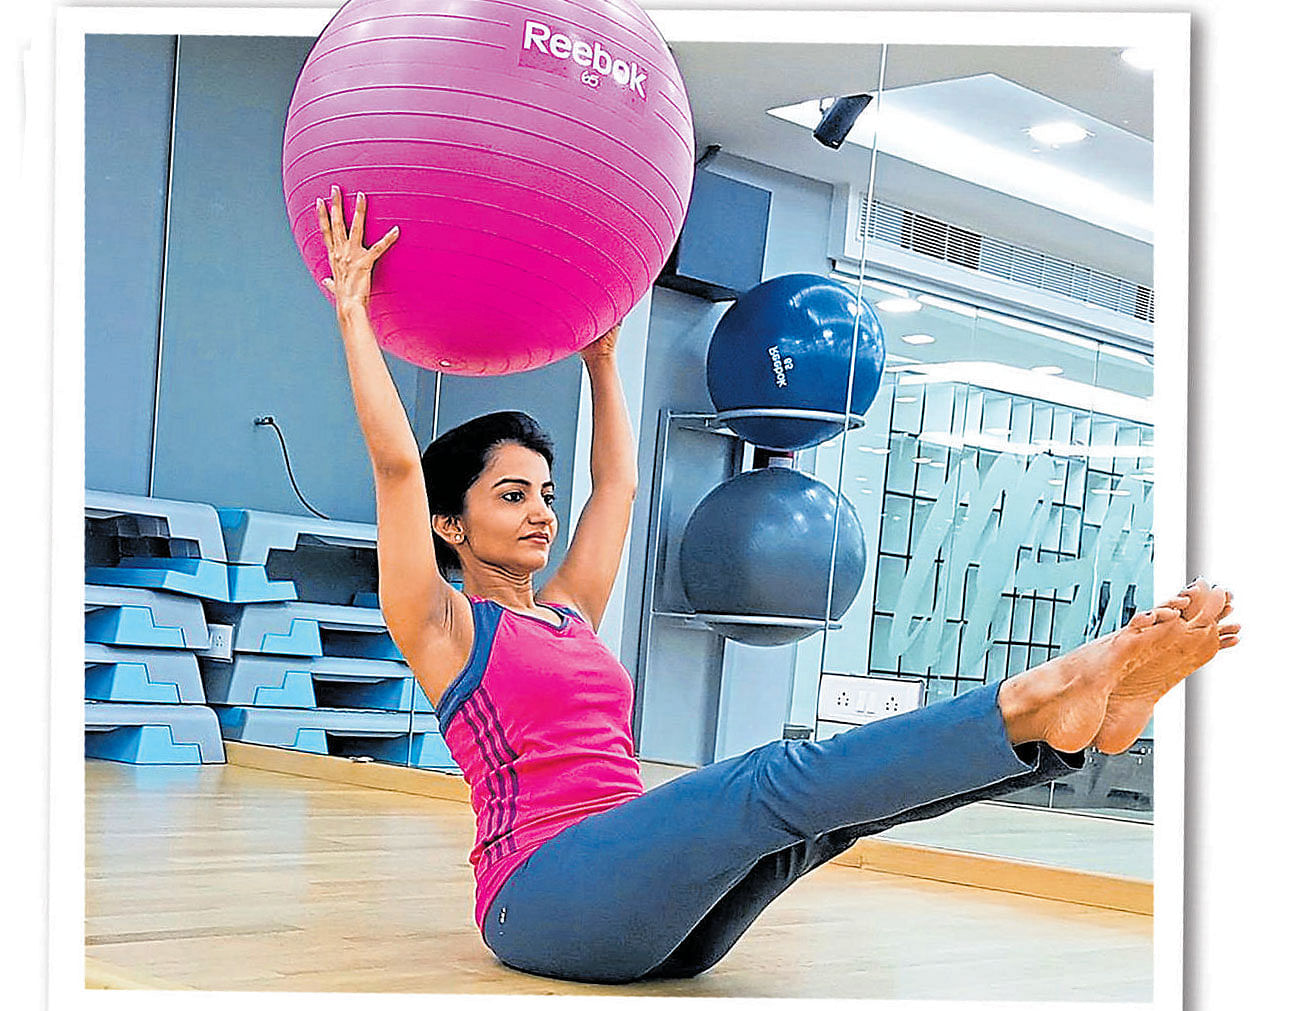 Pilates as a fitness option is seeing a surge among youngsters in the city. (Above) Aparna Pathak.